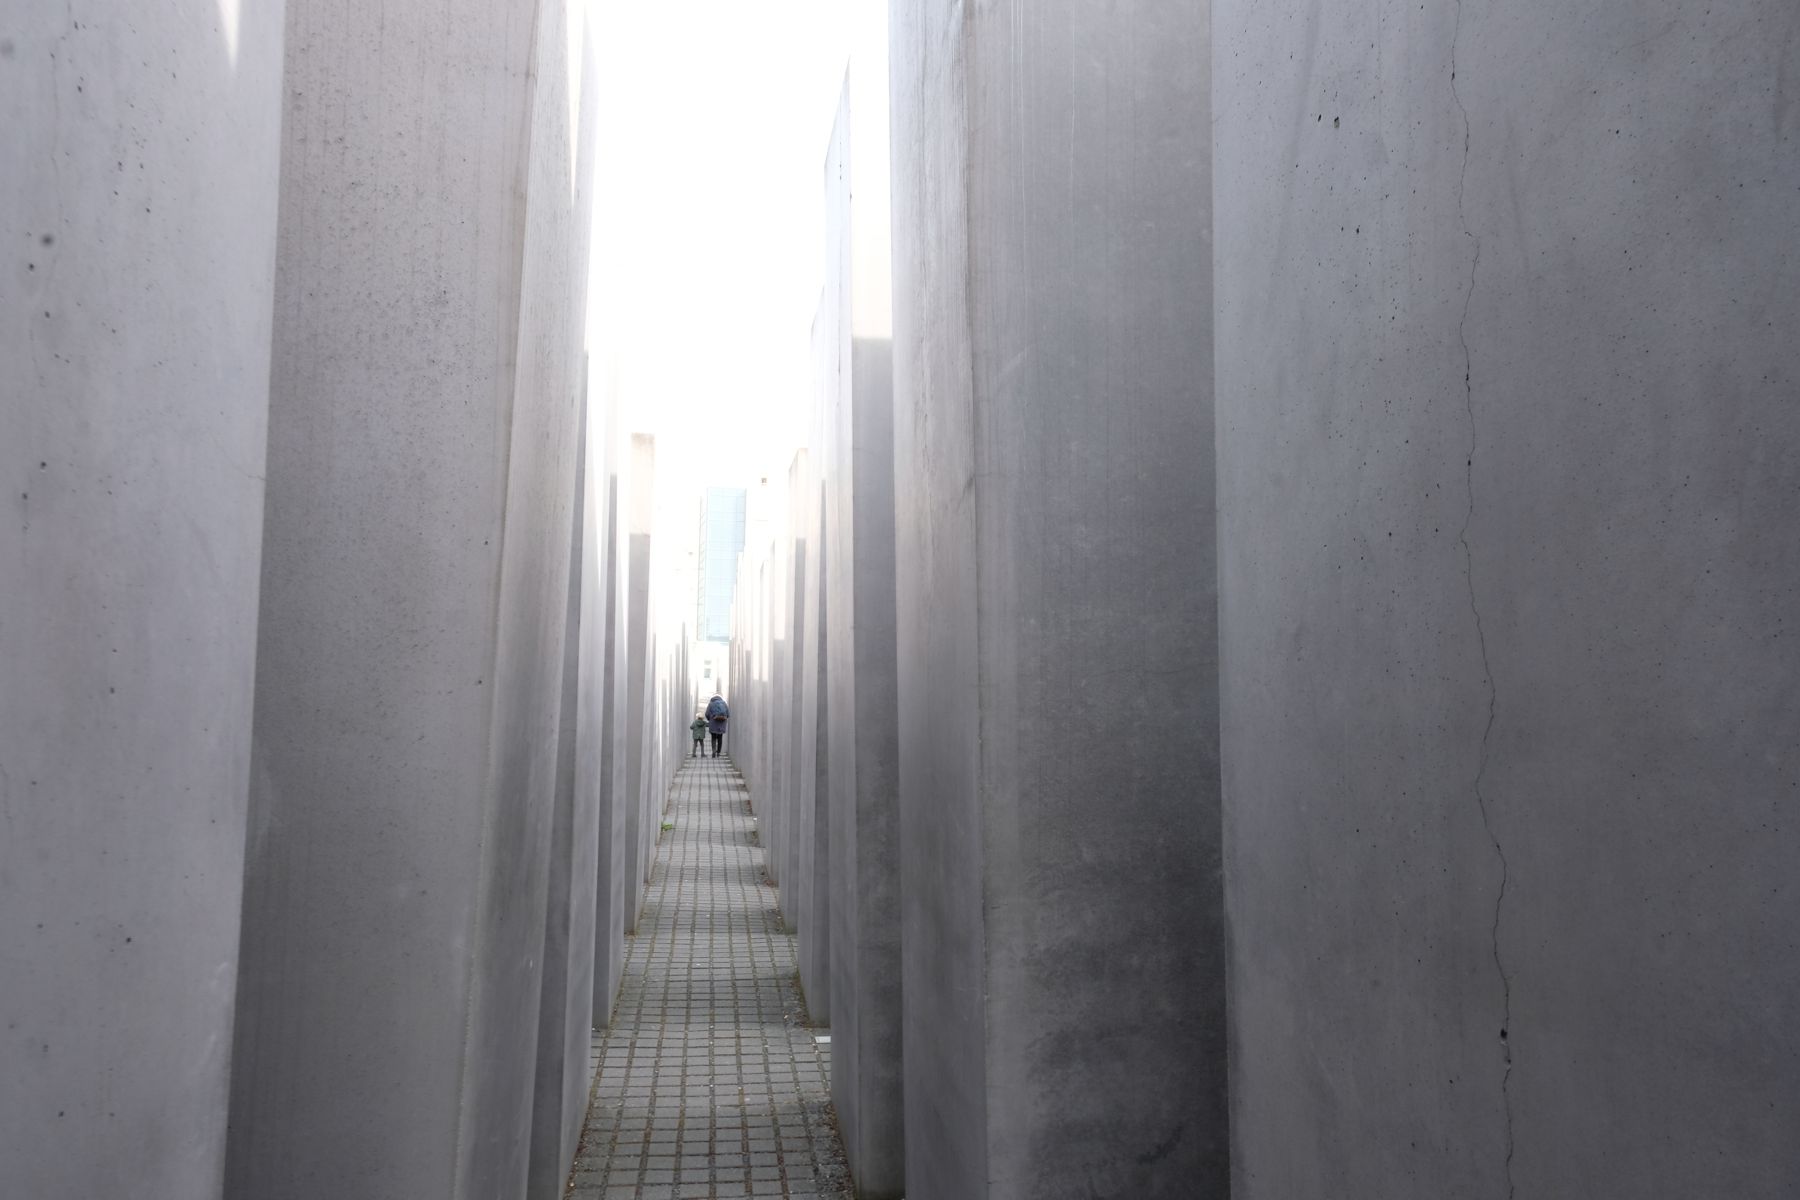 The Memorial to the Murdered Jews of Europe flooded with light